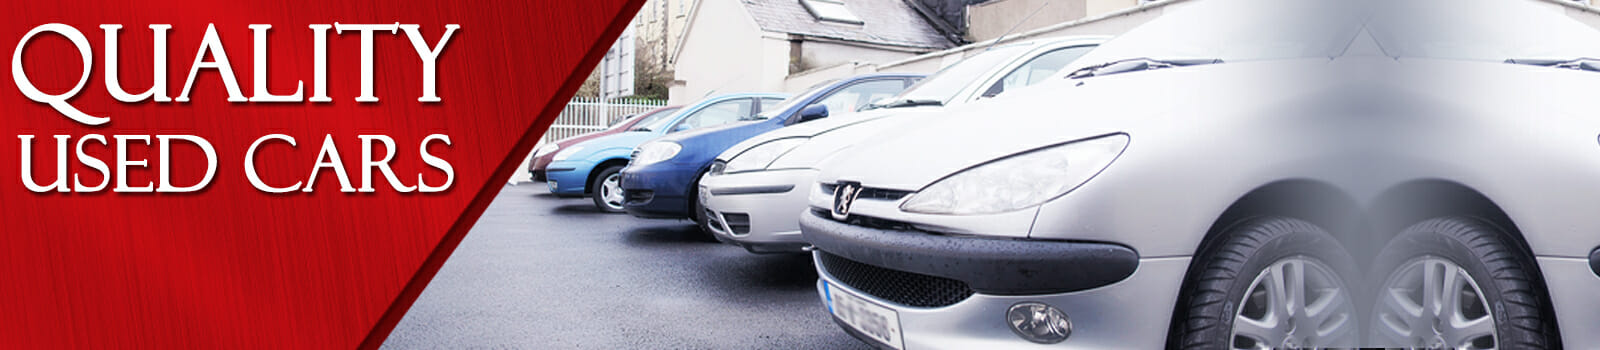 Quality Used Cars Waterford City